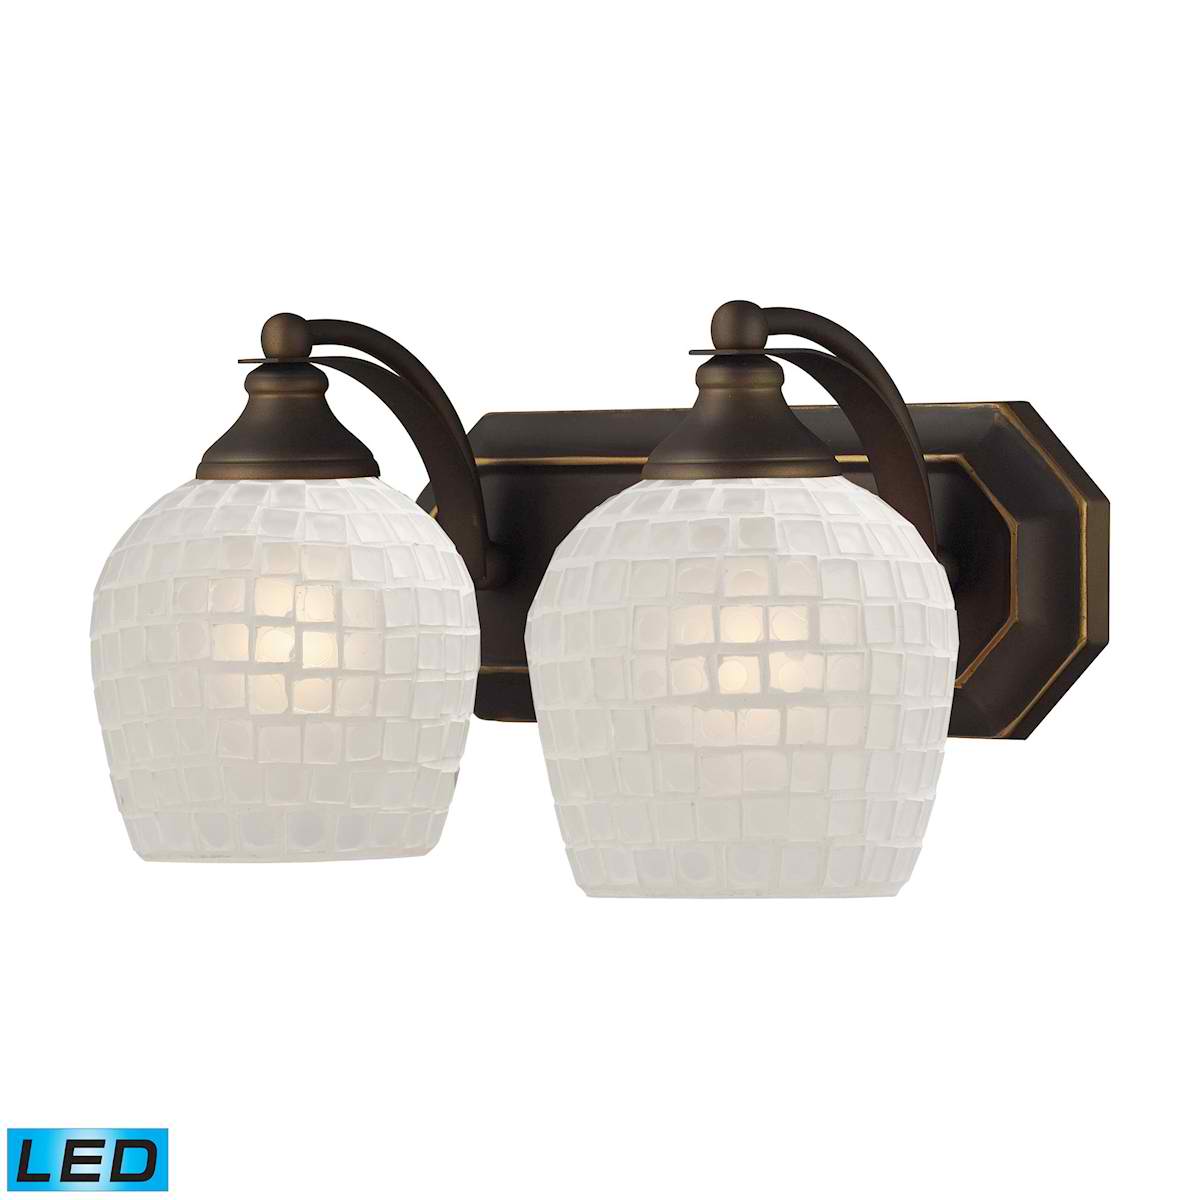 2 Light Vanity in Aged Bronze and White Mosaic Glass - LED, 800 Lumens (1600 Lumens Total) with Full Scale